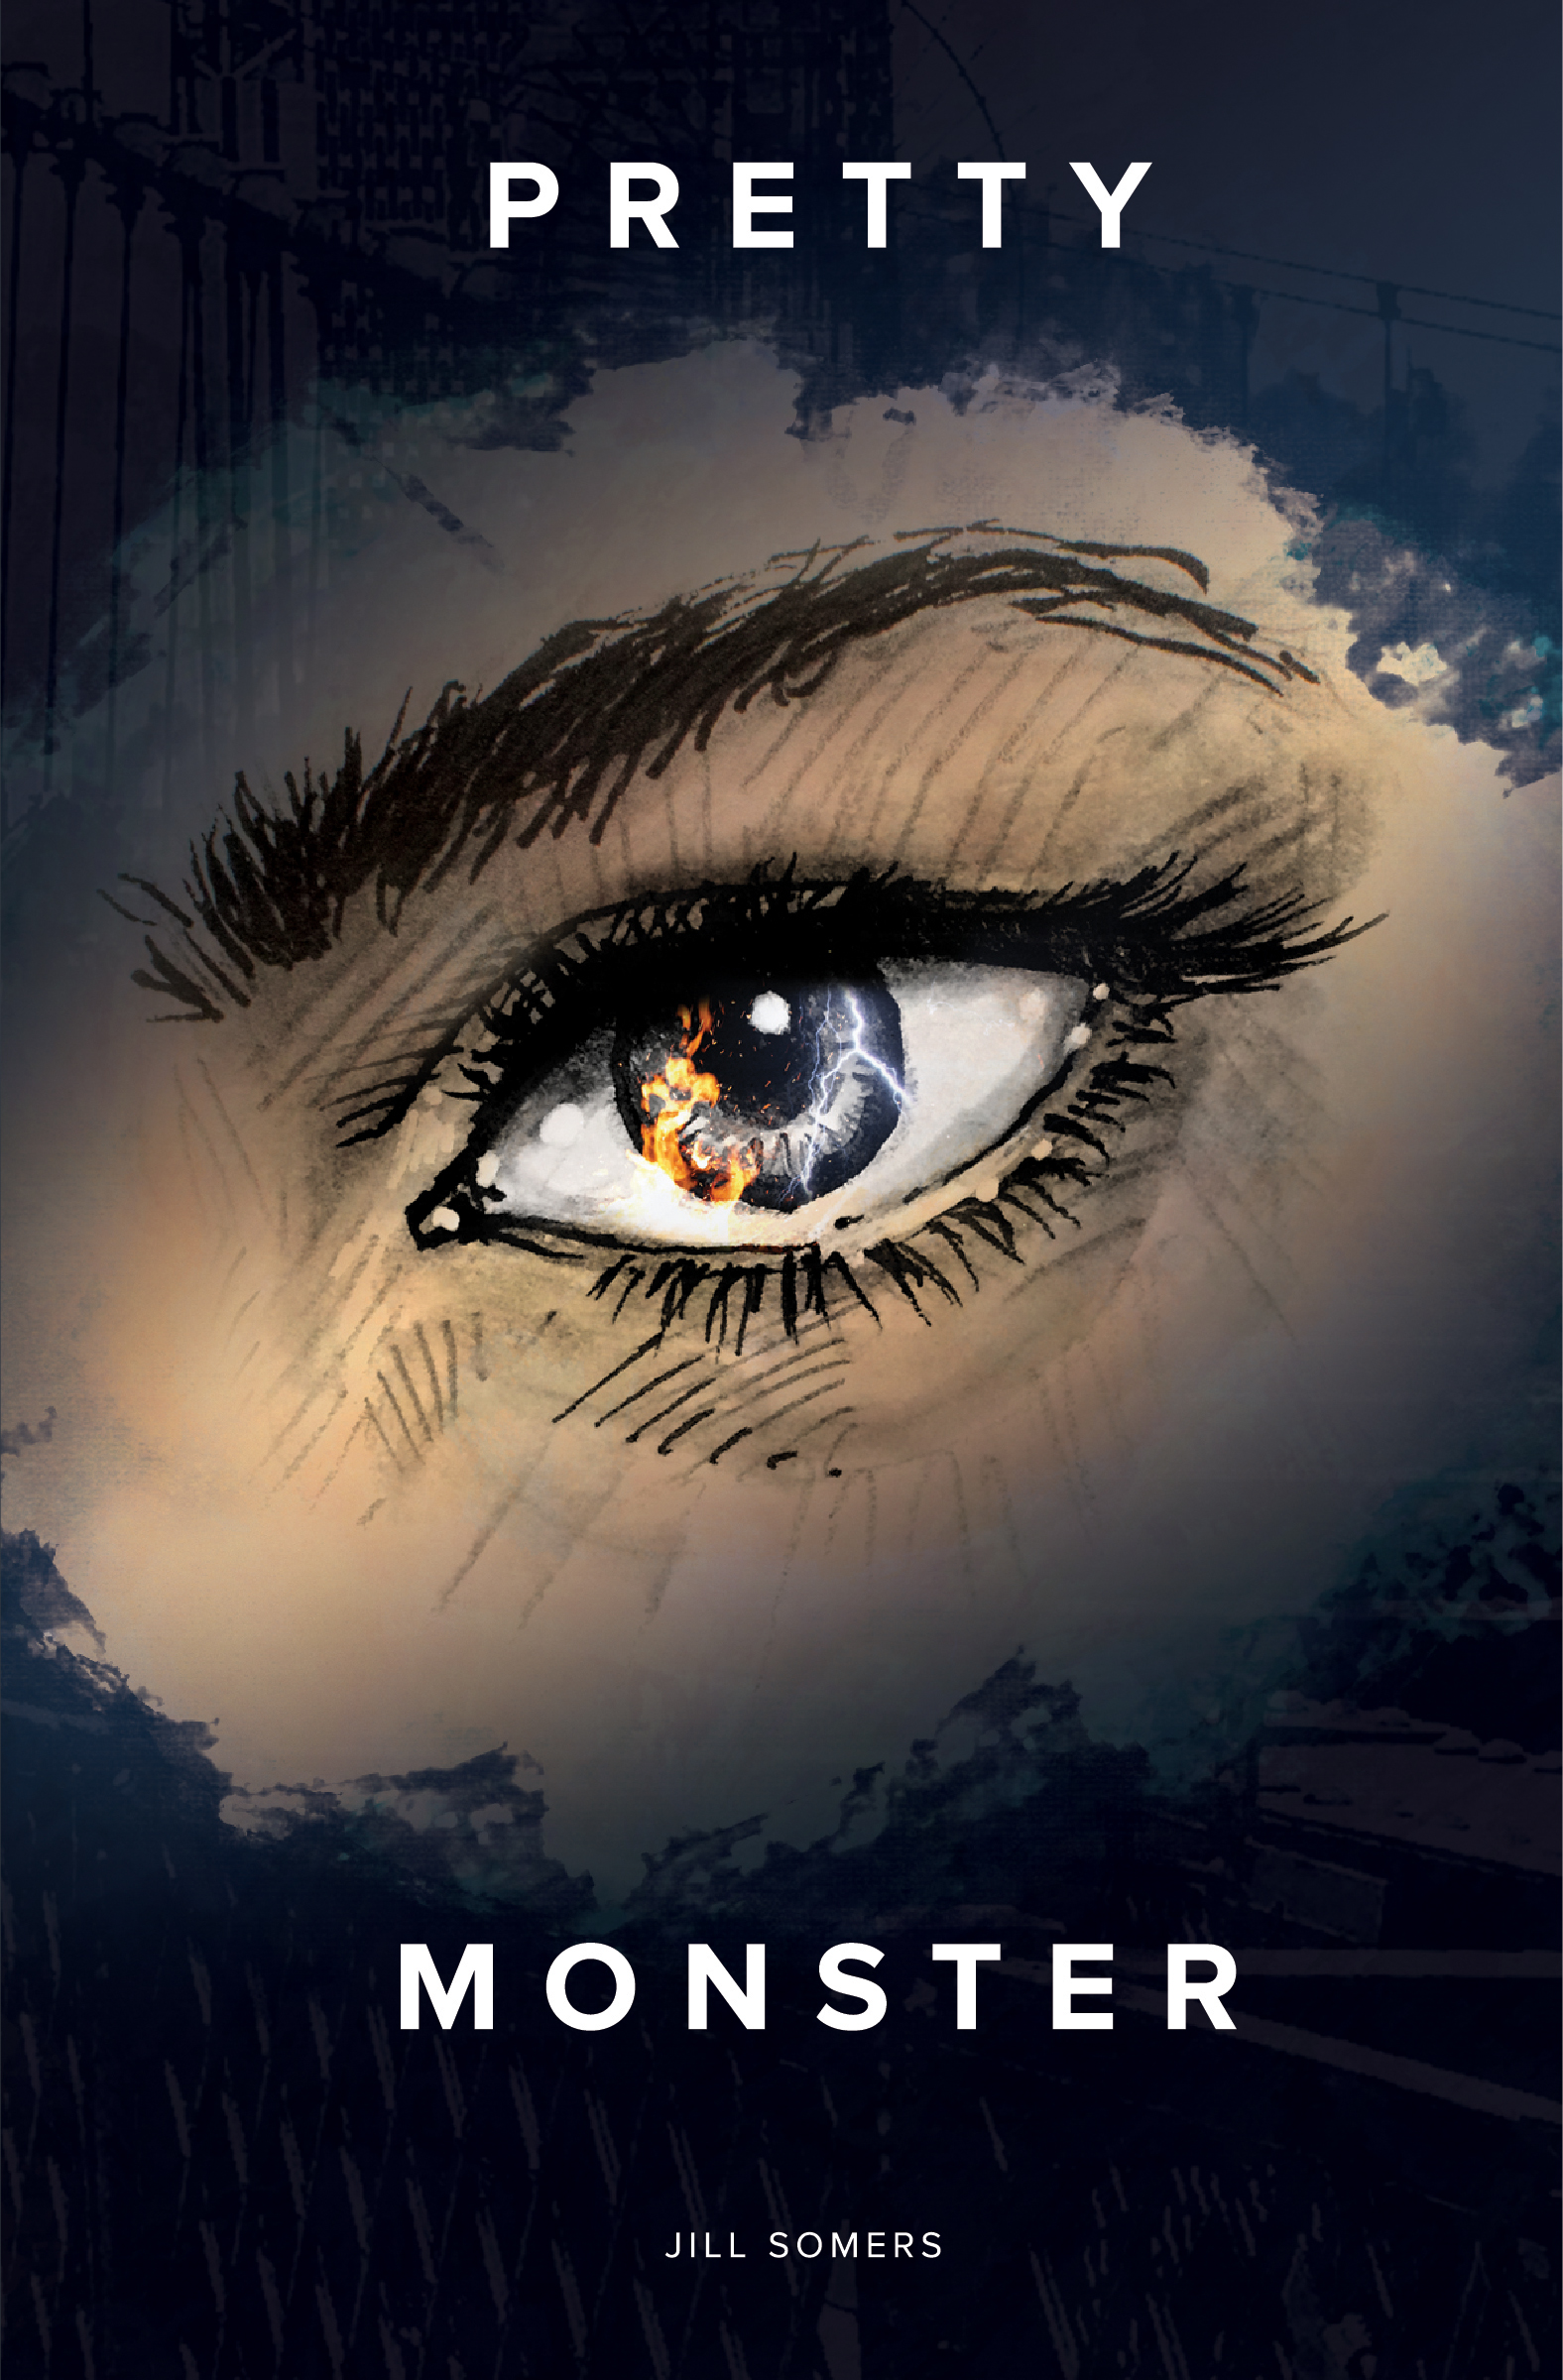 FREE: Pretty Monster by Jill Somers